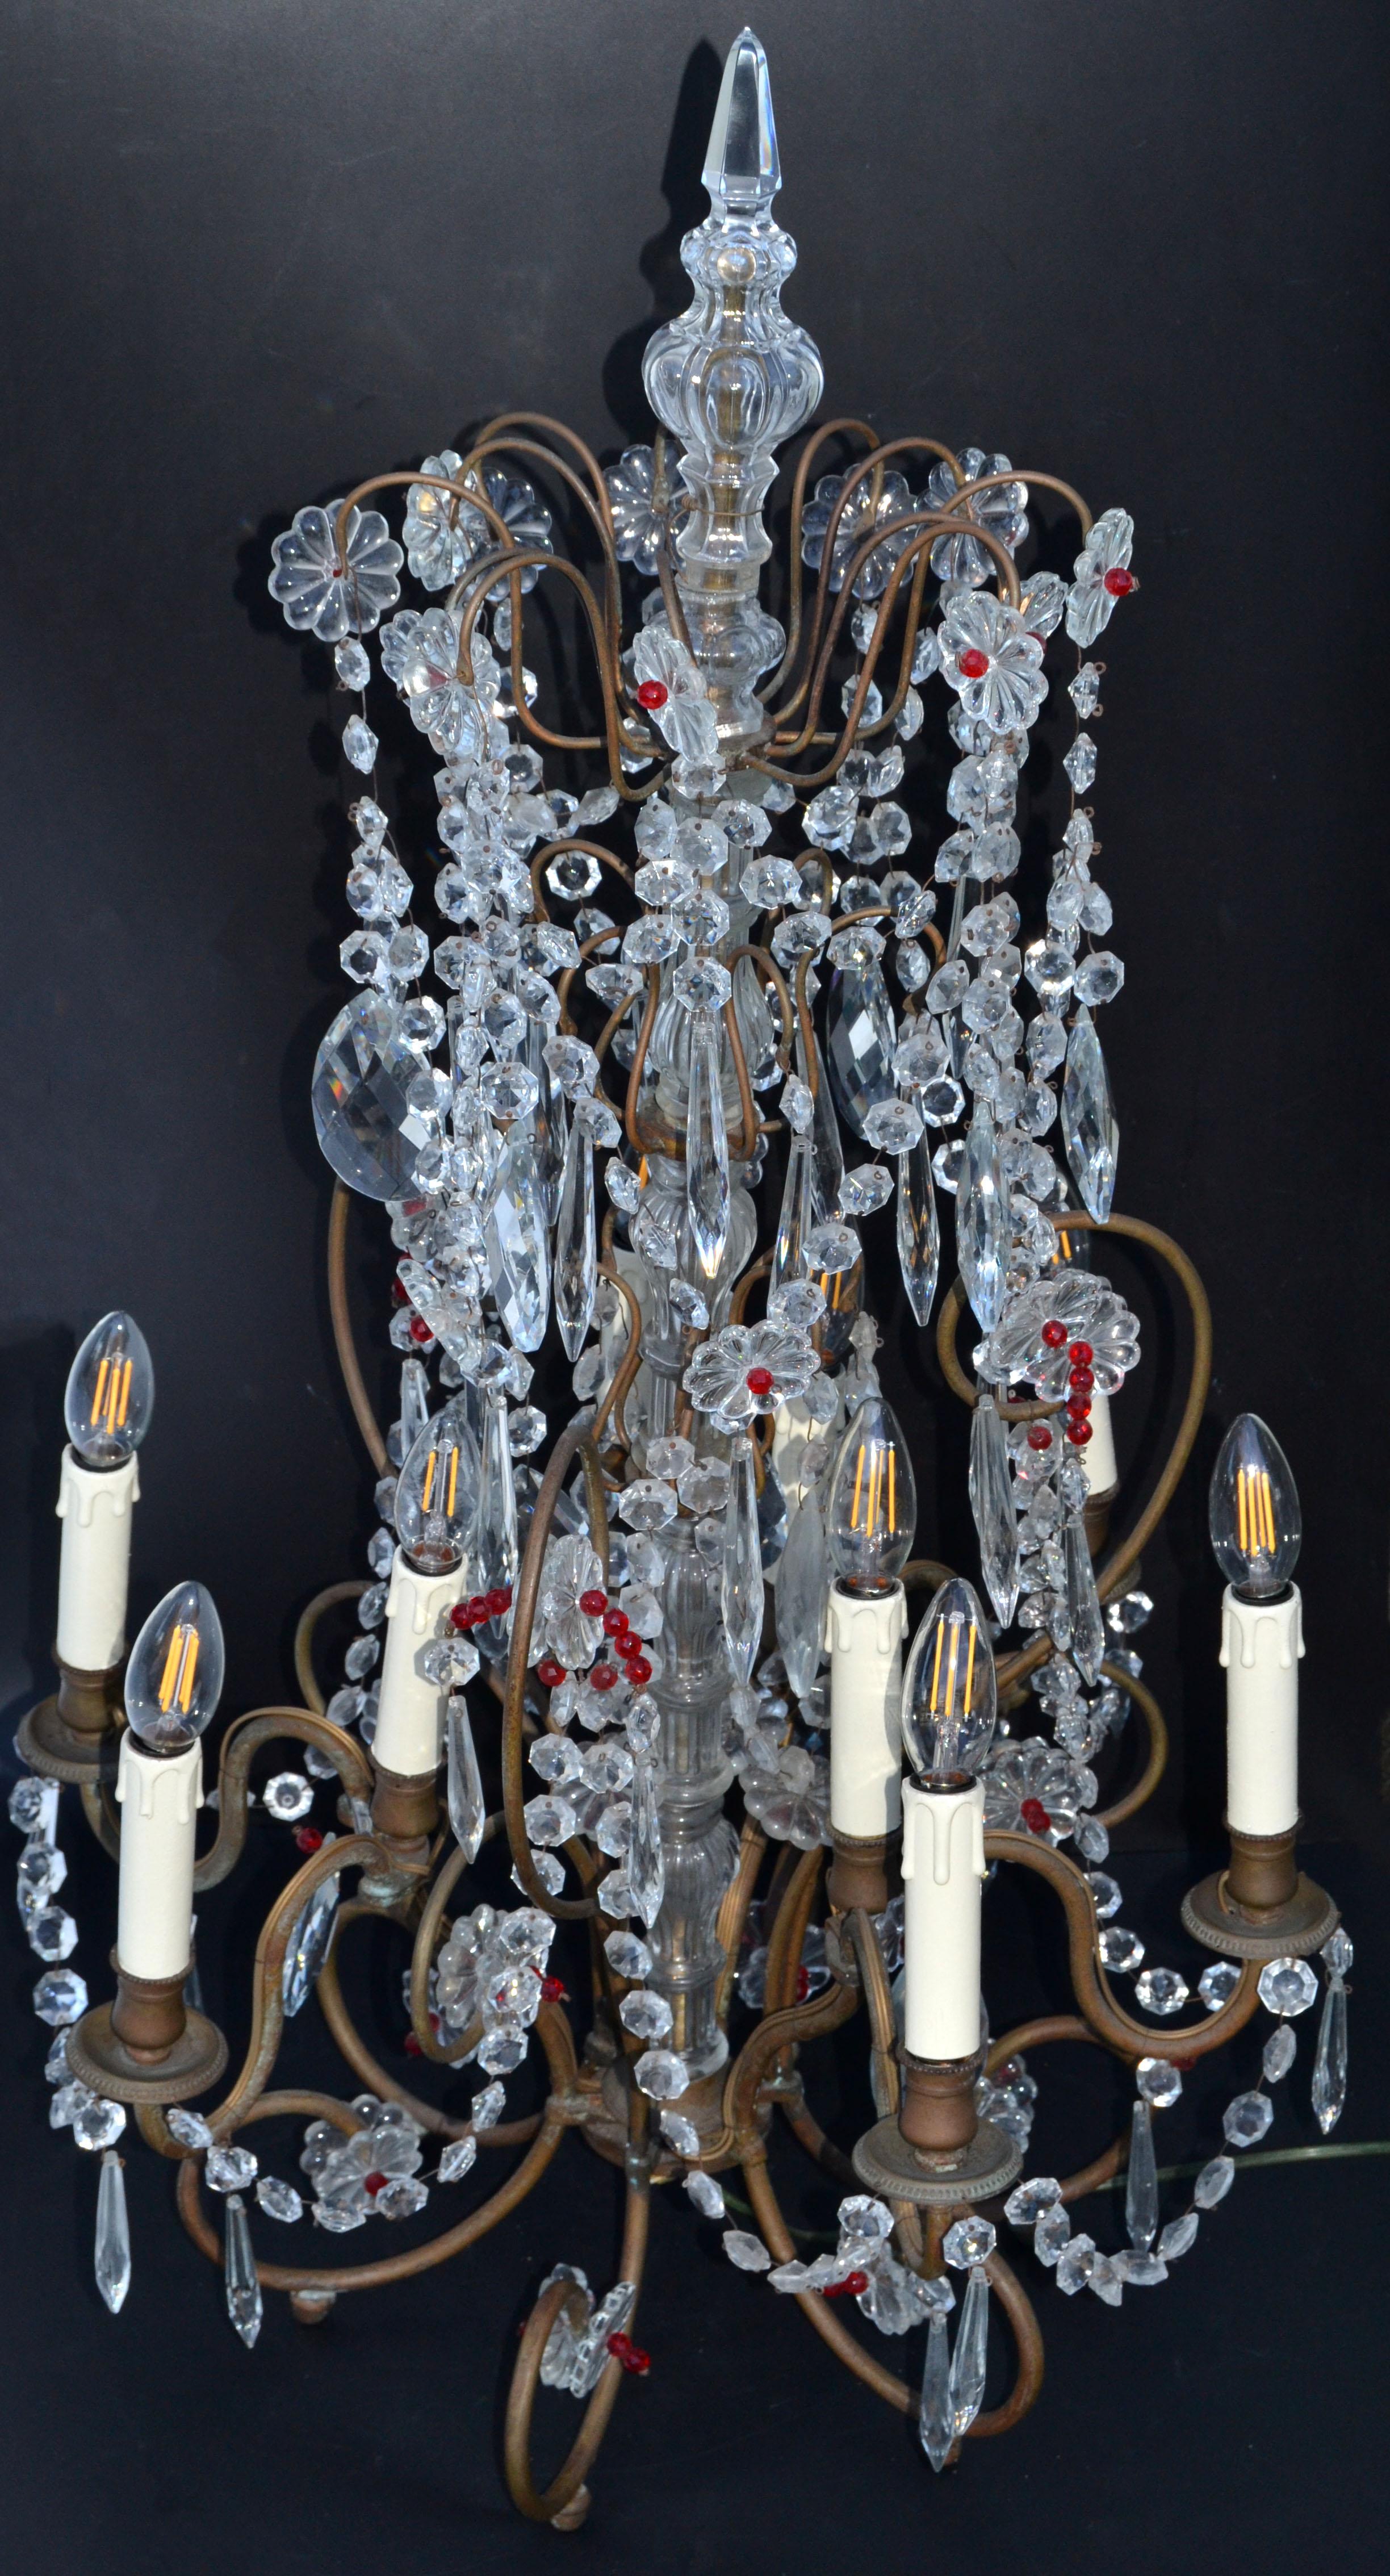 Hand-Crafted Large 9 Light Girandoles Maison Baguès Brass & Crystal Ornaments, Pair For Sale